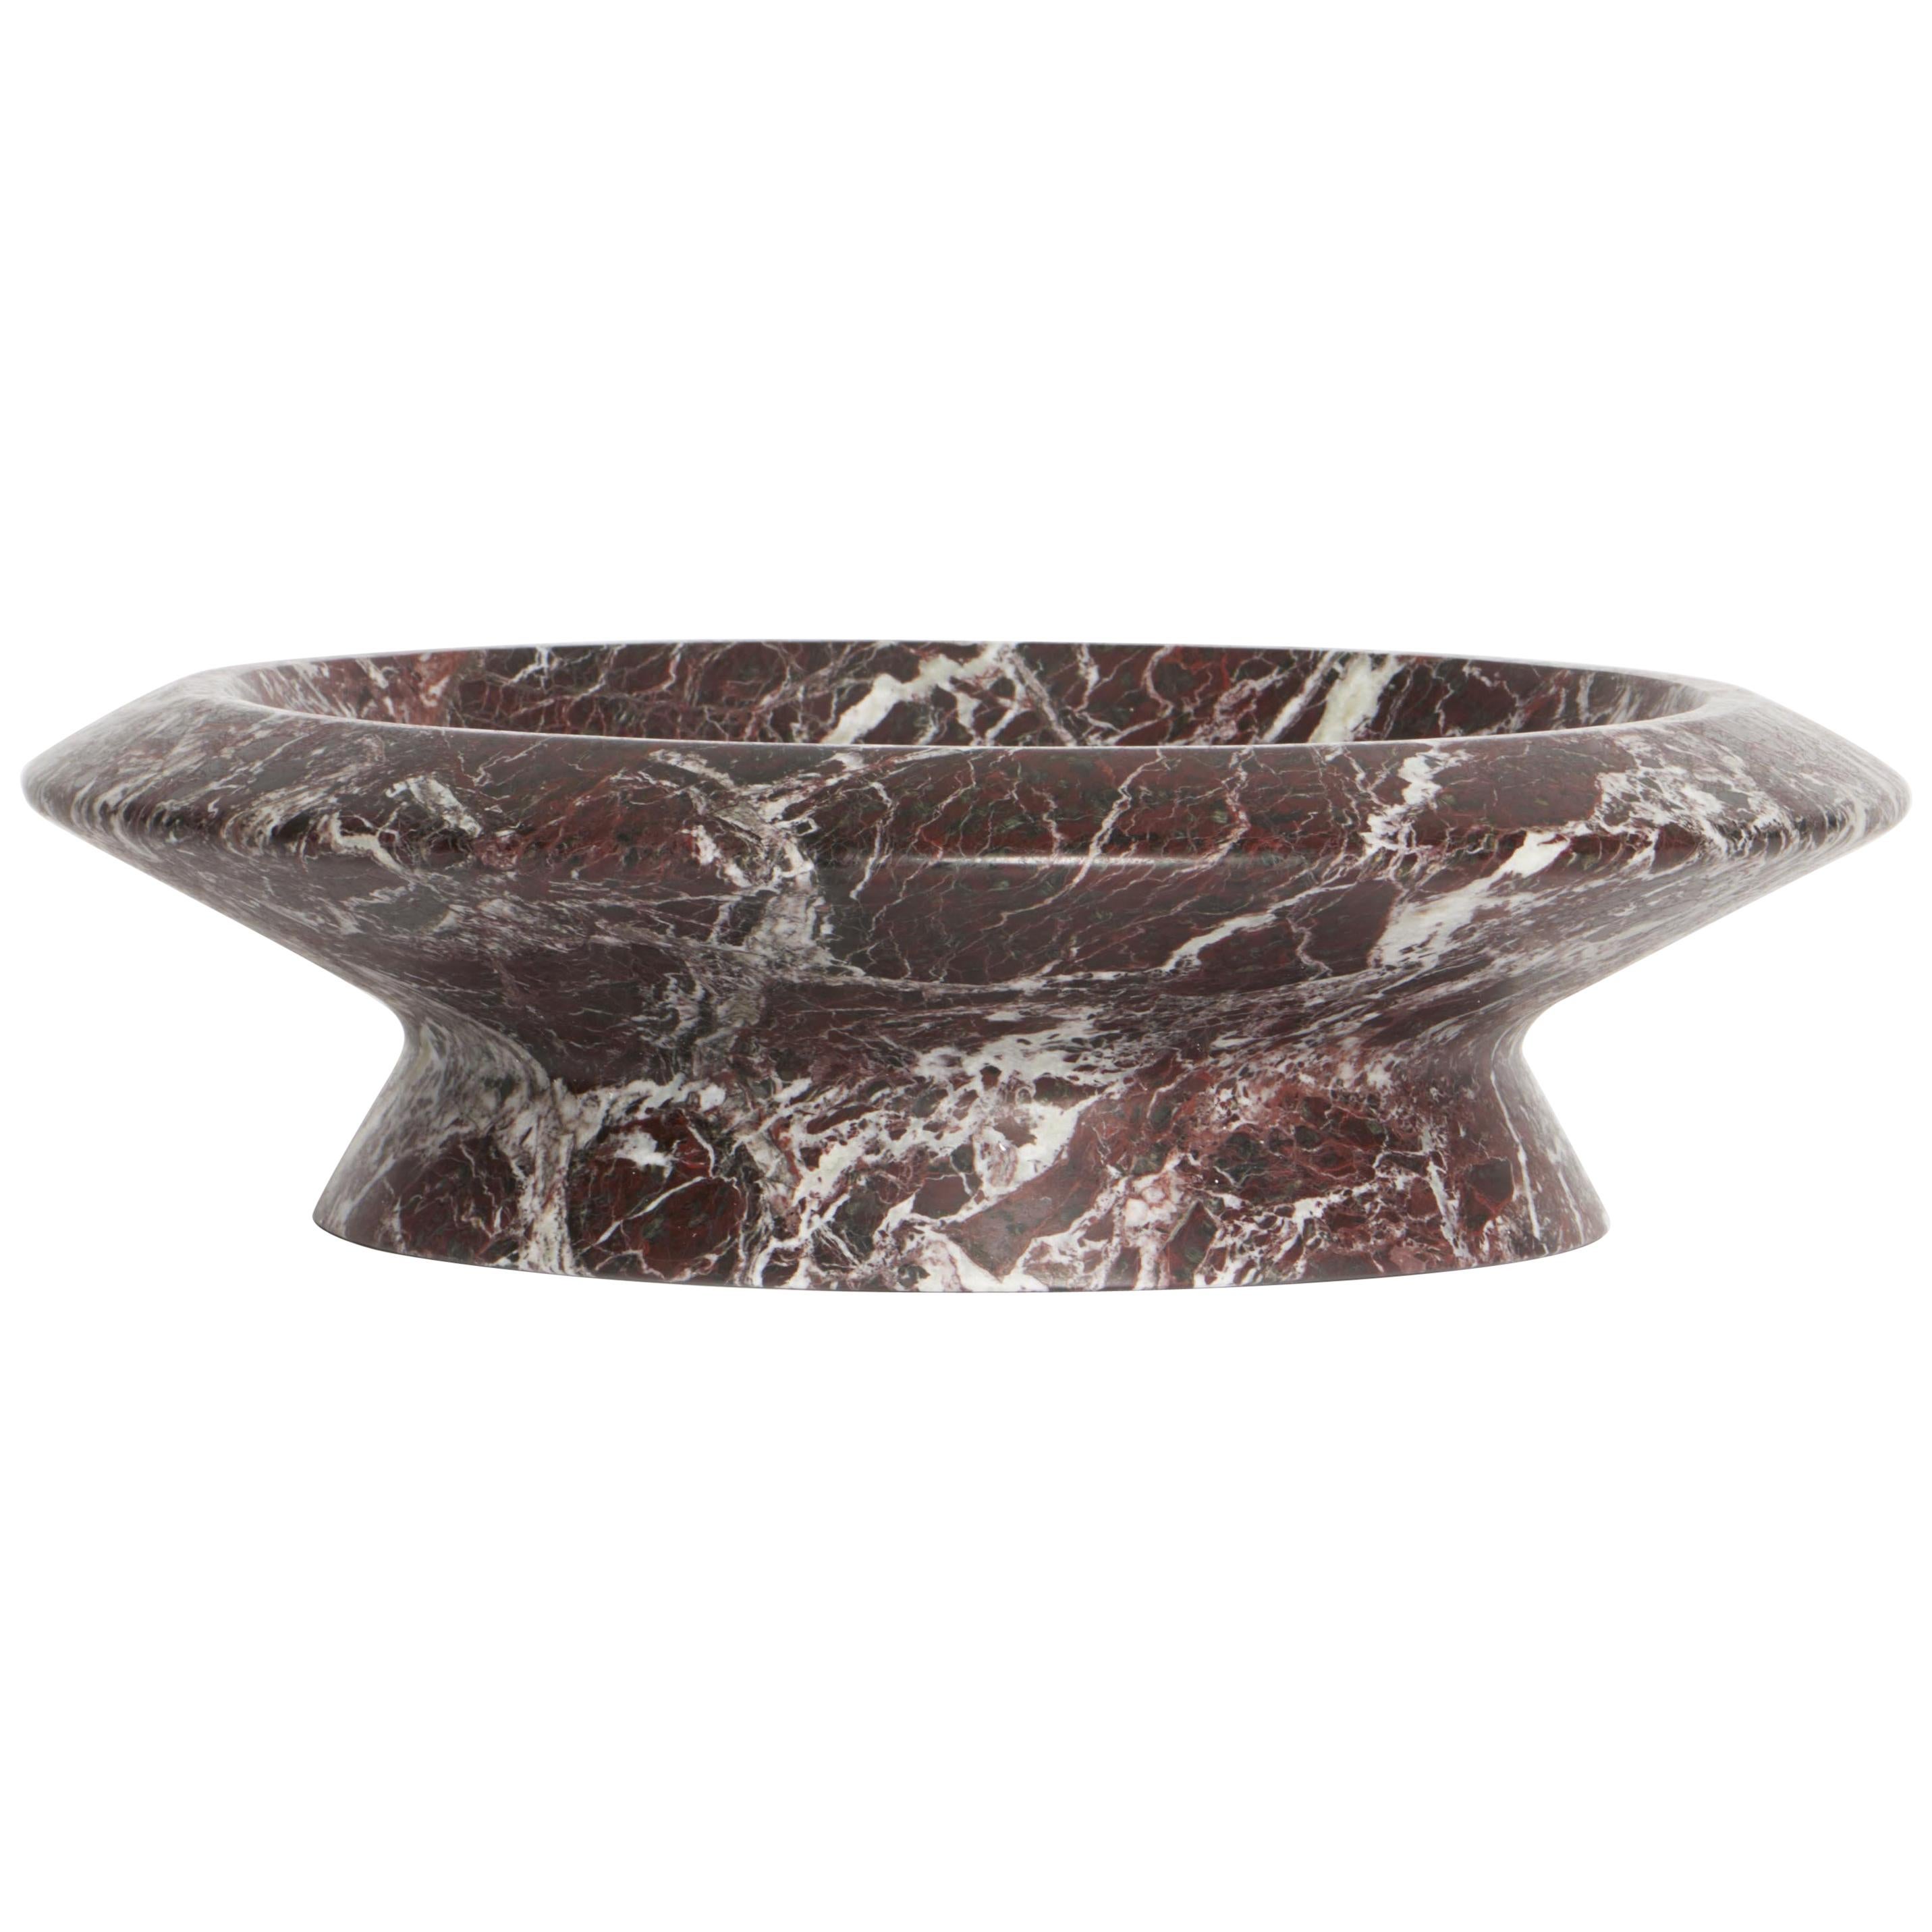 New Modern Centerpiece in Red Levanto Marble, creator Ivan Colominas For Sale